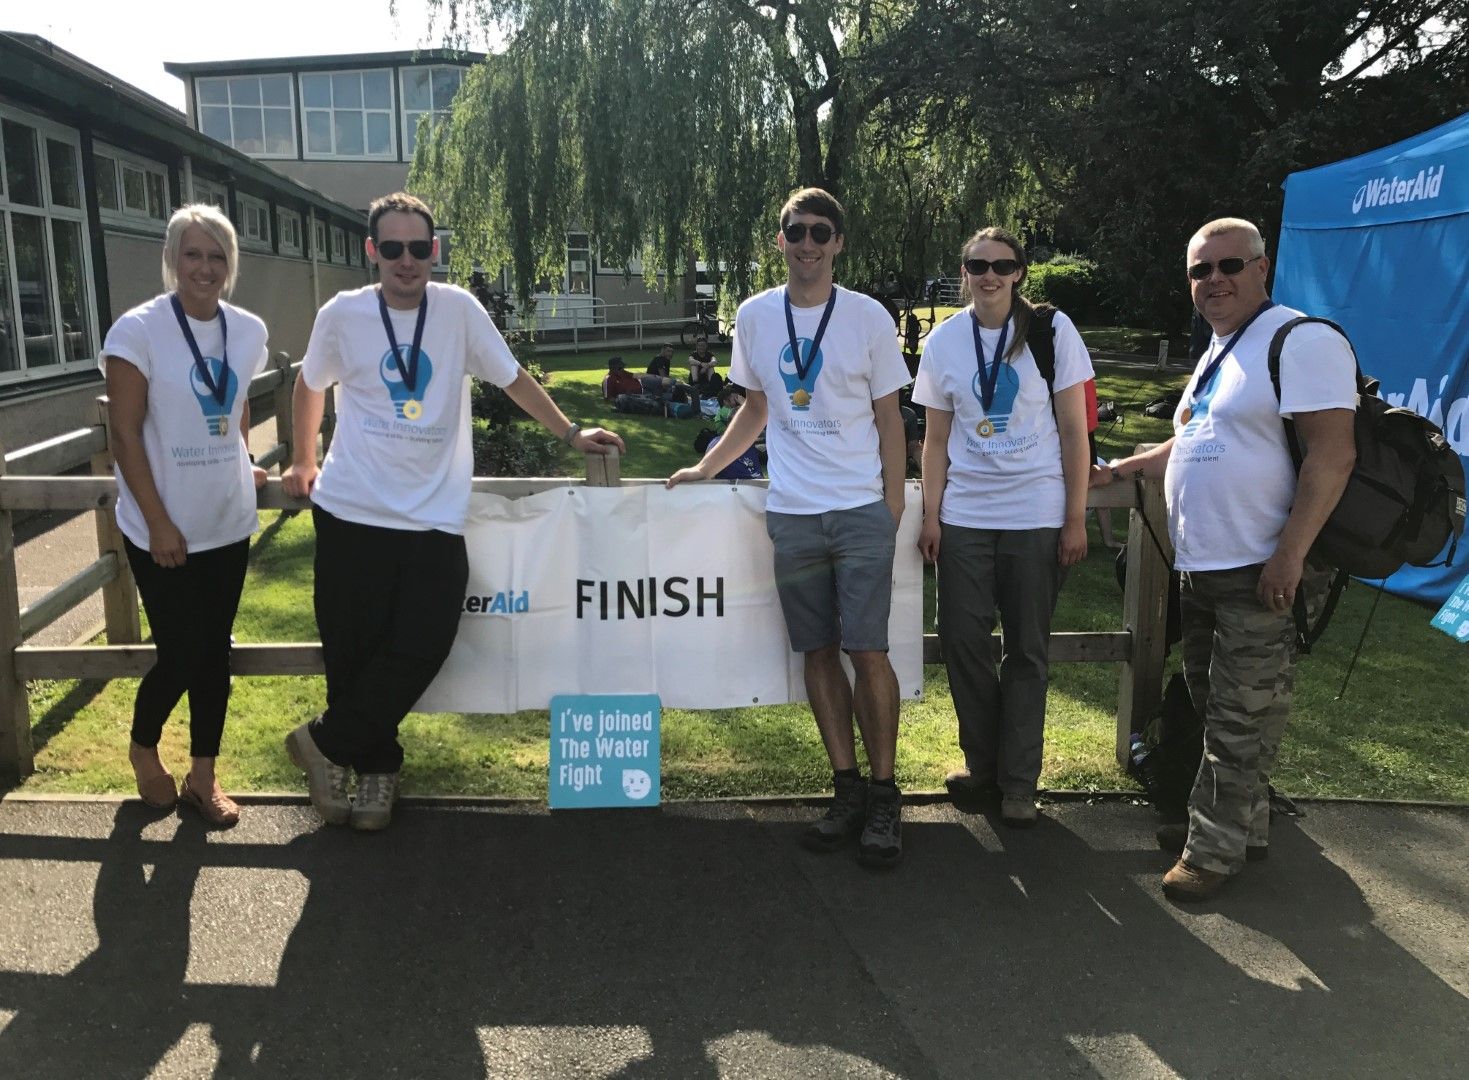 Water innovators - our team after completing the 10km Severn Trent challenge